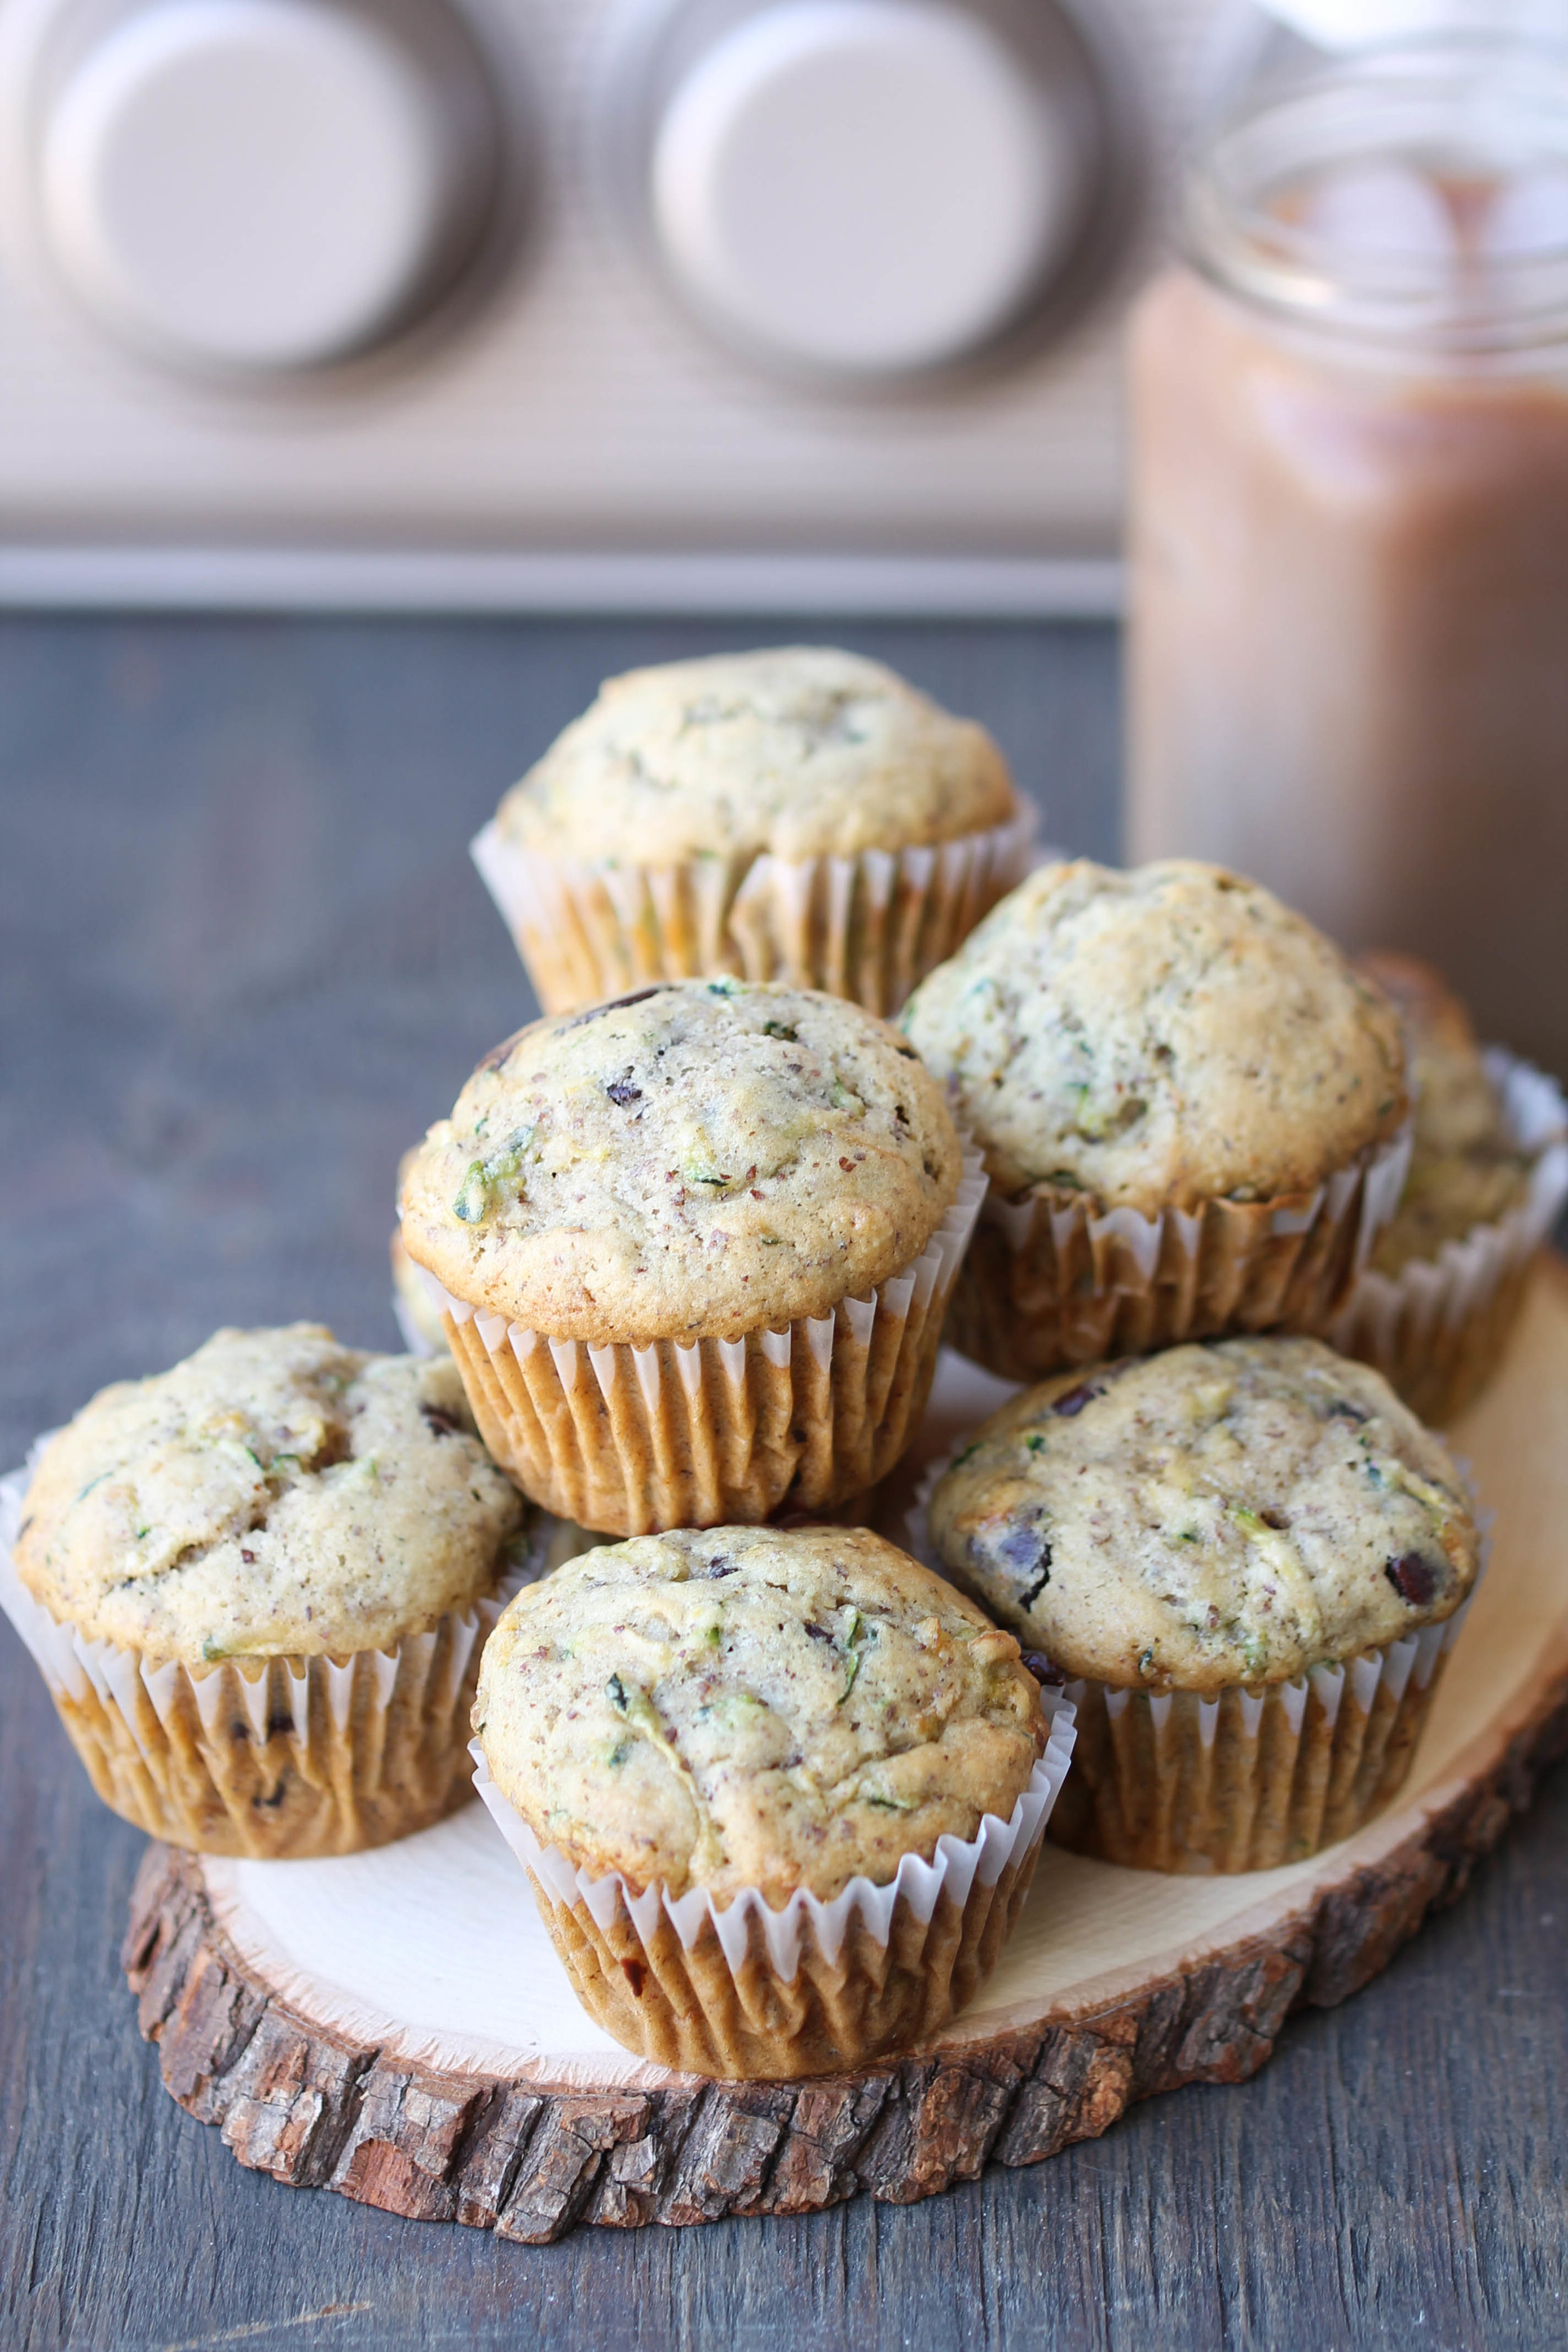 Chocolate Chip Zucchini Muffins are insanely delicious, tender, and easy. Make a batch using leftover zucchini and enjoy them for a quick snack or dessert!